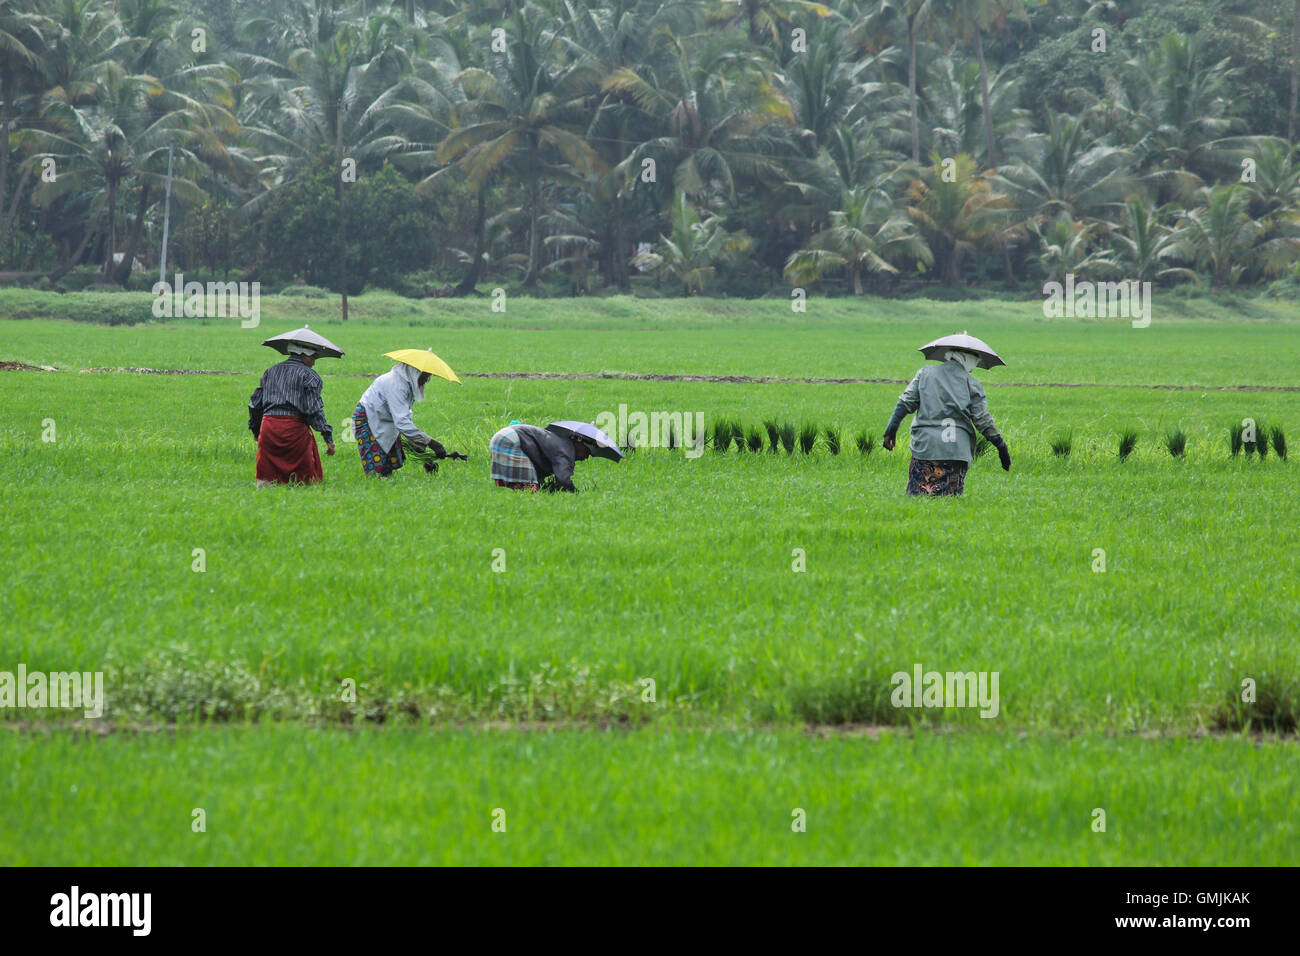 Paddyfield workers in Kerala. Farm workers plant organically cultivated paddy seedlings in the paddy fields. Stock Photo